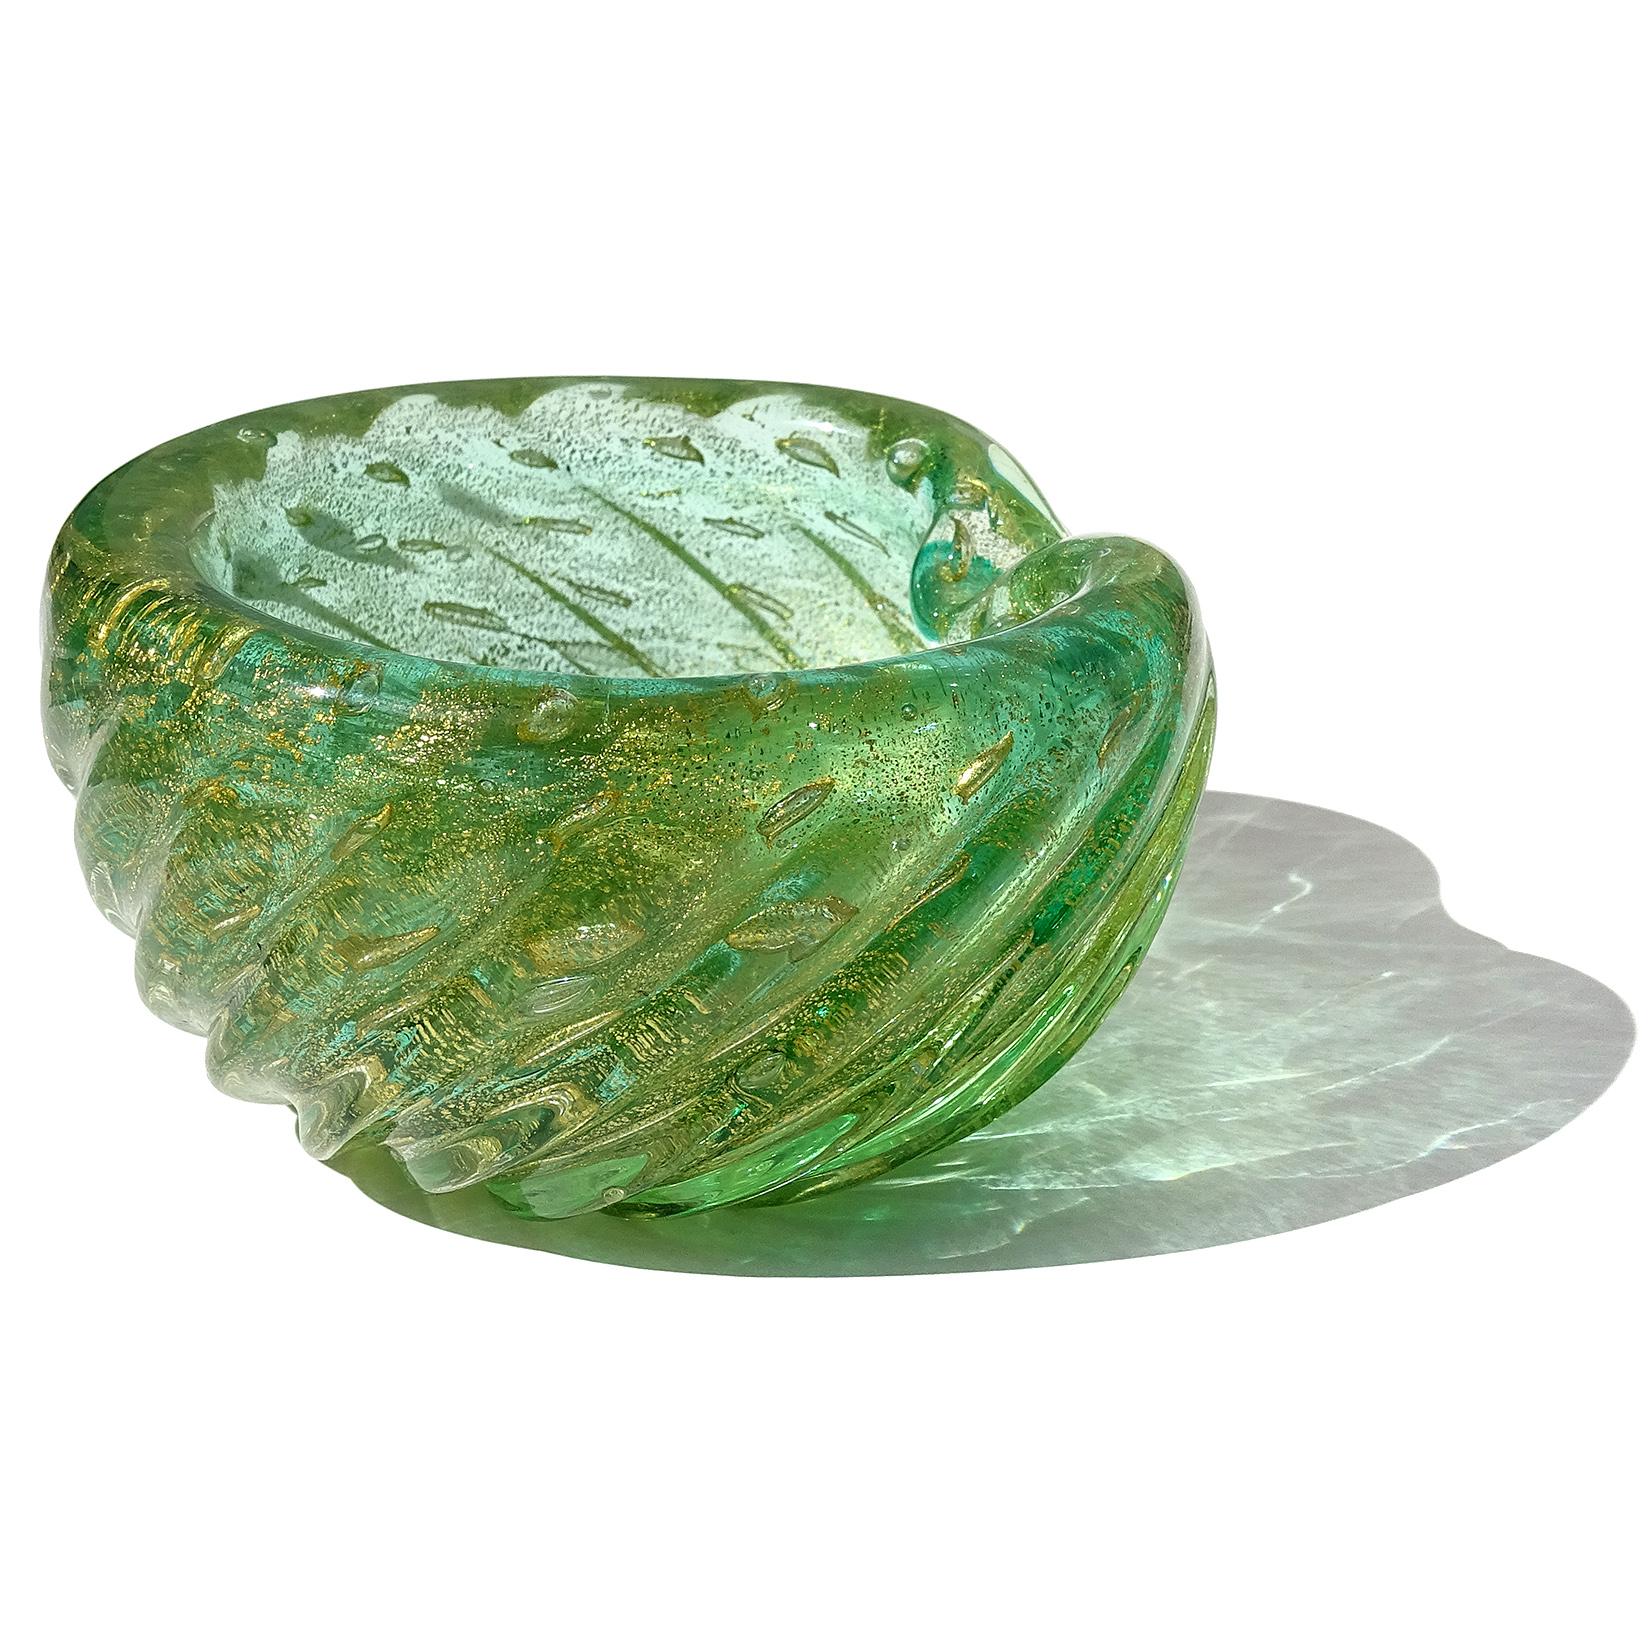 Beautiful vintage Murano hand blown green, controlled bubbles, gold flecks Italian art glass personal ashtray, bowl. Documented to the Barovier e Toso company. Created in a 